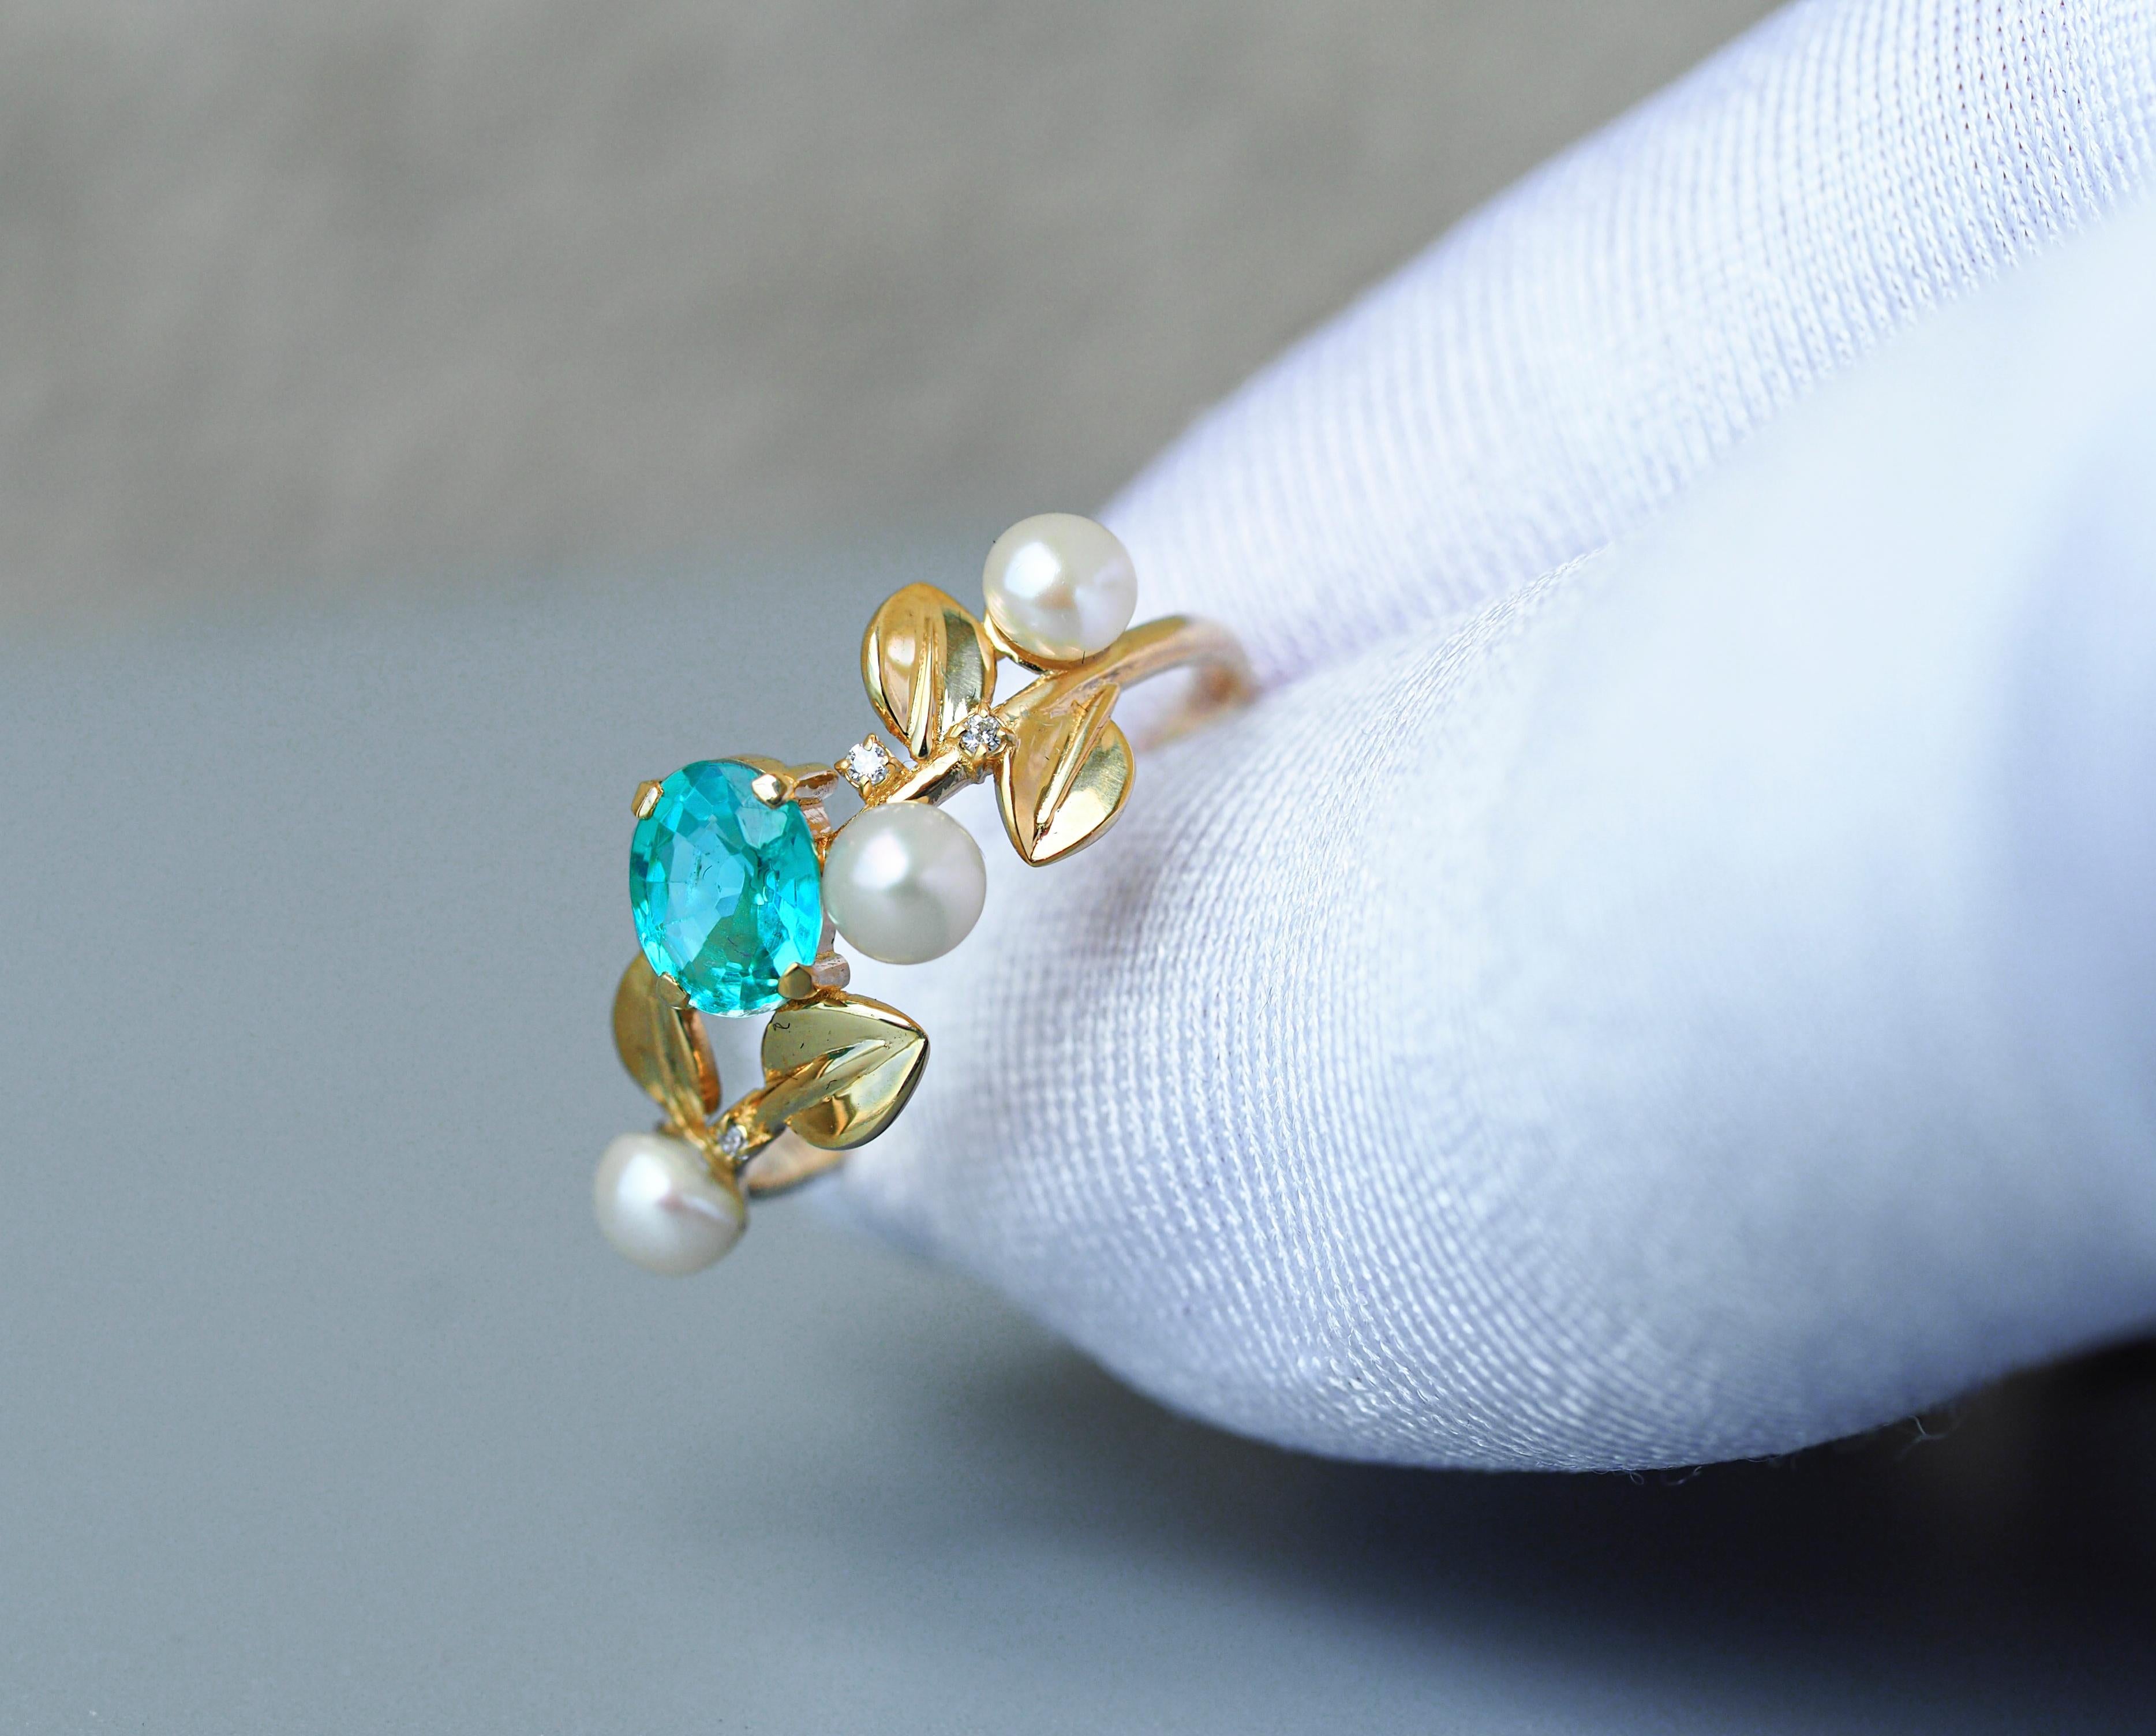 14k Gold Floral Ring with Oval Apatite, Diamonds and Pearls 2